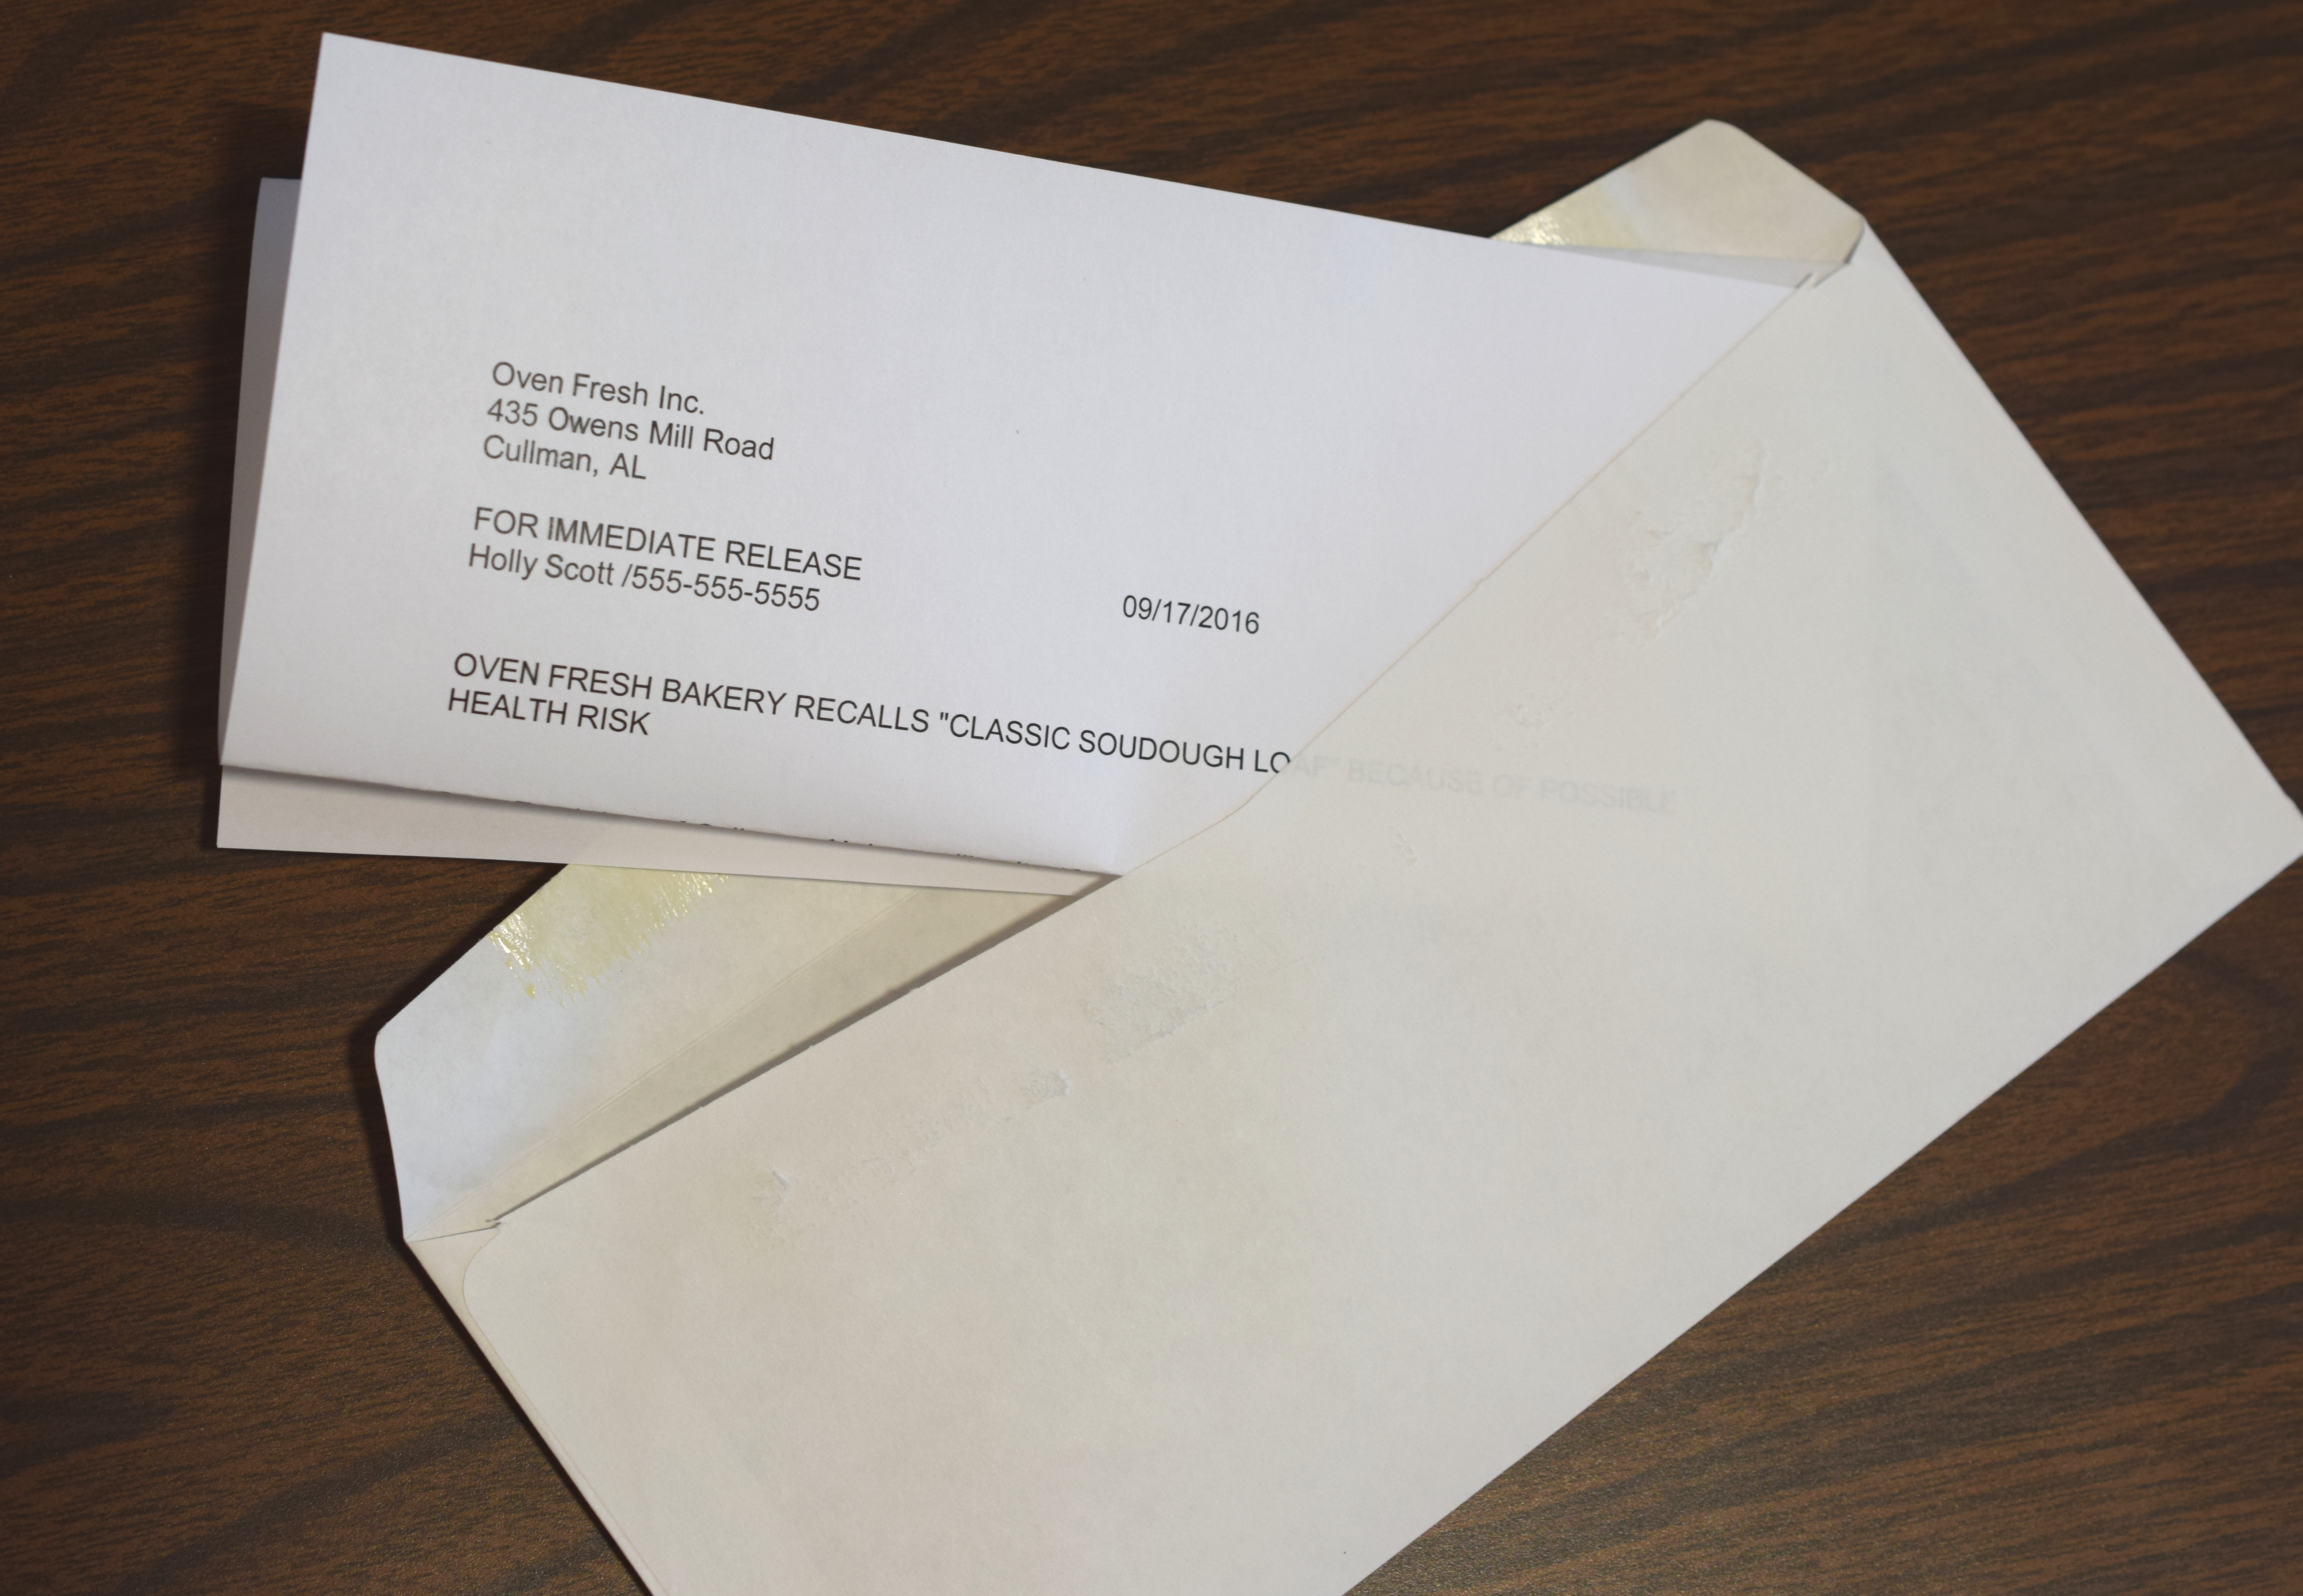 Envelope with a sample recall letter in it with contact information for the company issuing the recall and the product being recalled